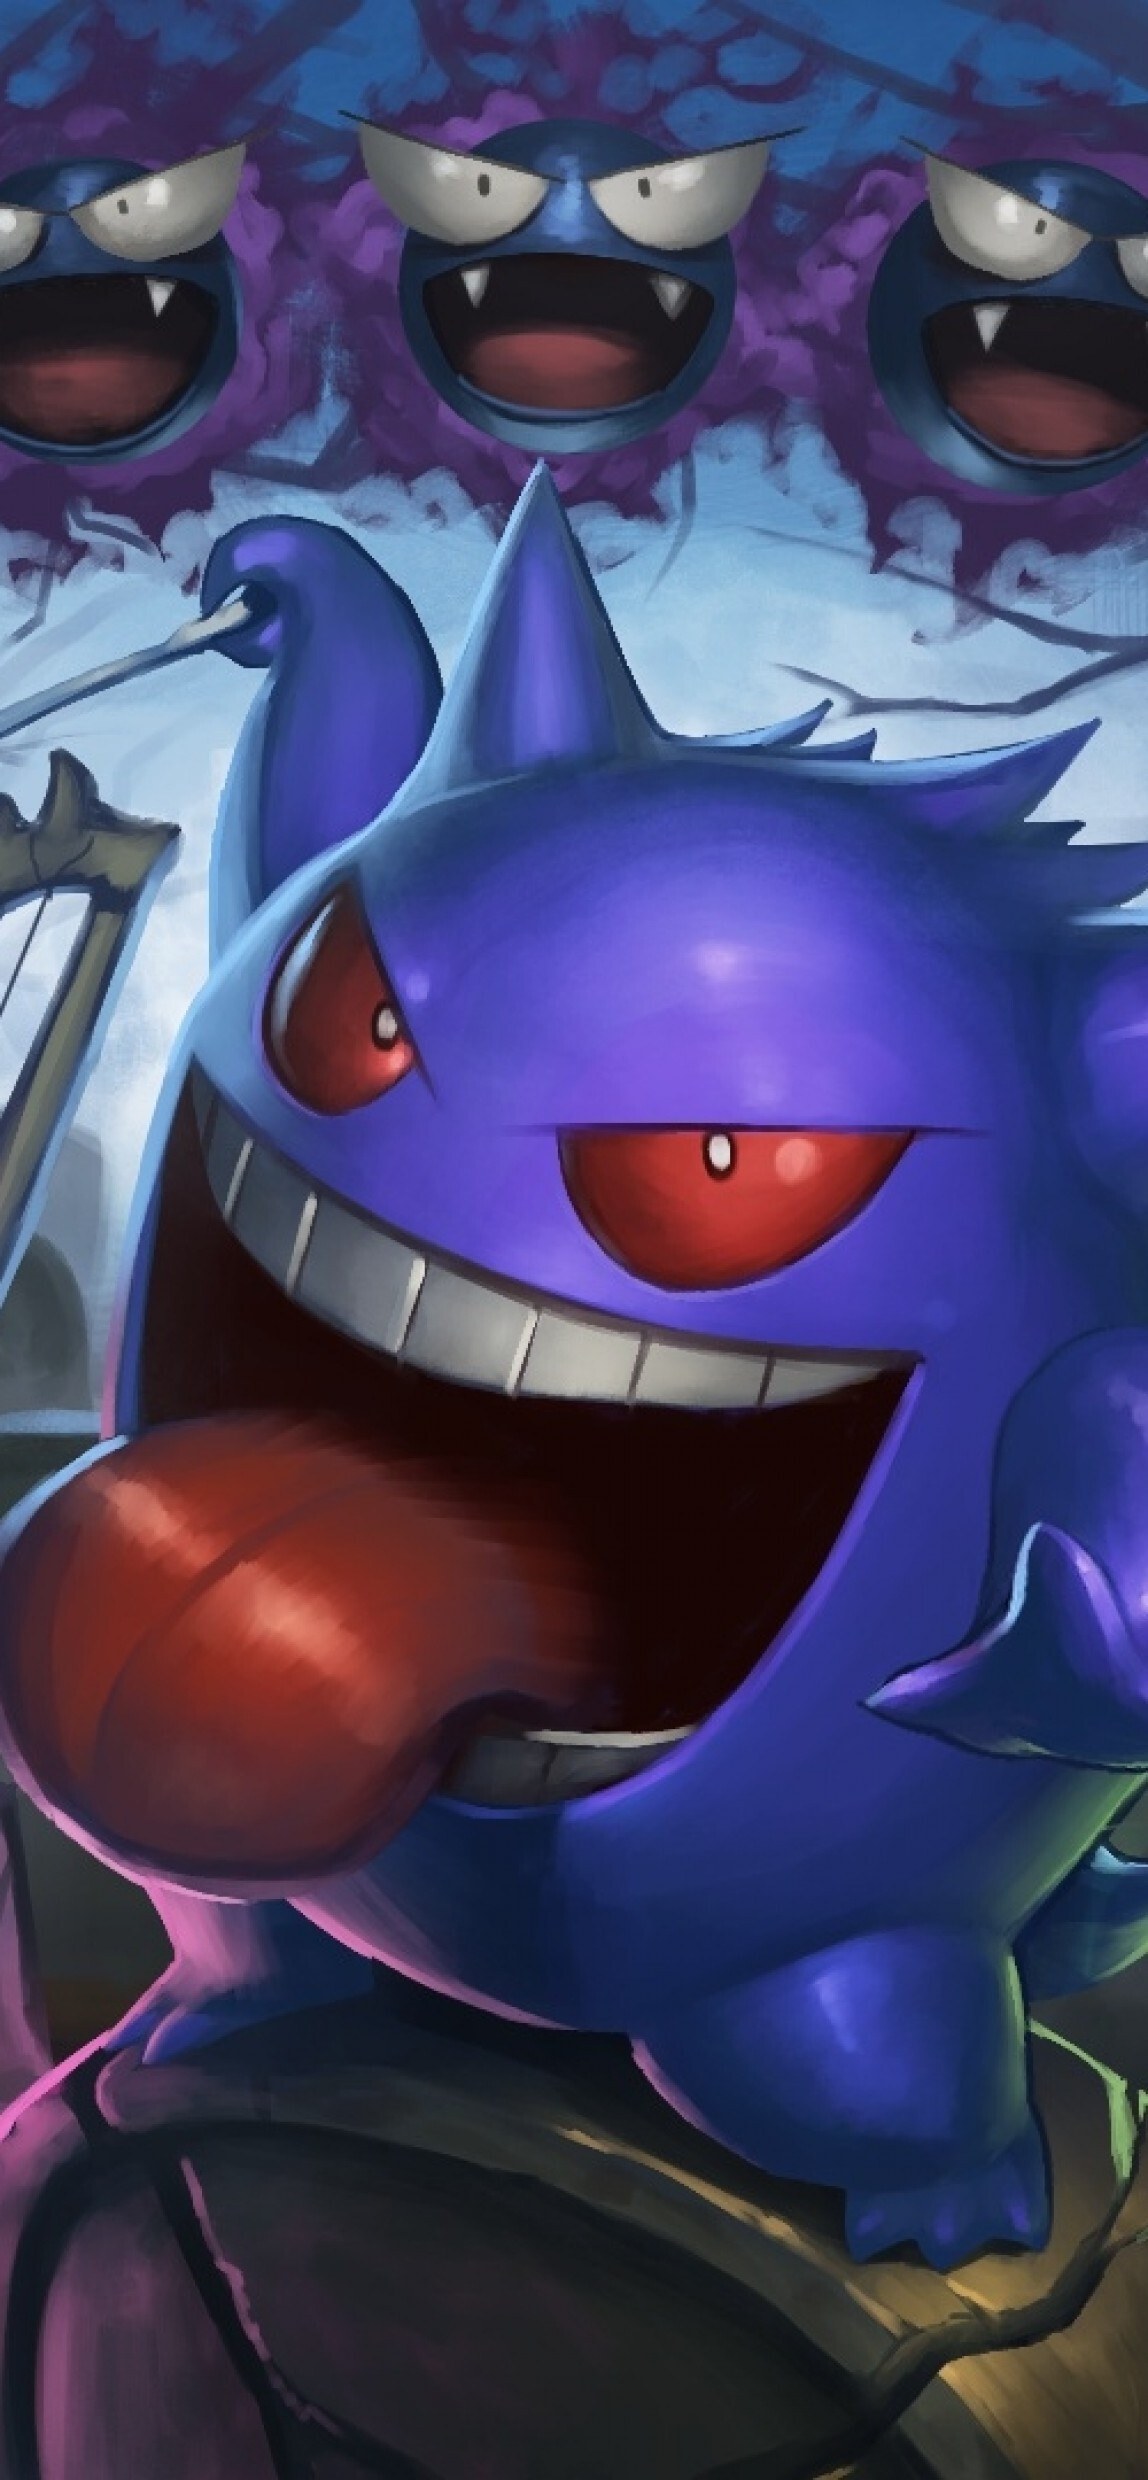 Gastly: Haunter, Gengar, Pokemon that can sneak into any place it desires with its vapor-like body. 1150x2480 HD Wallpaper.